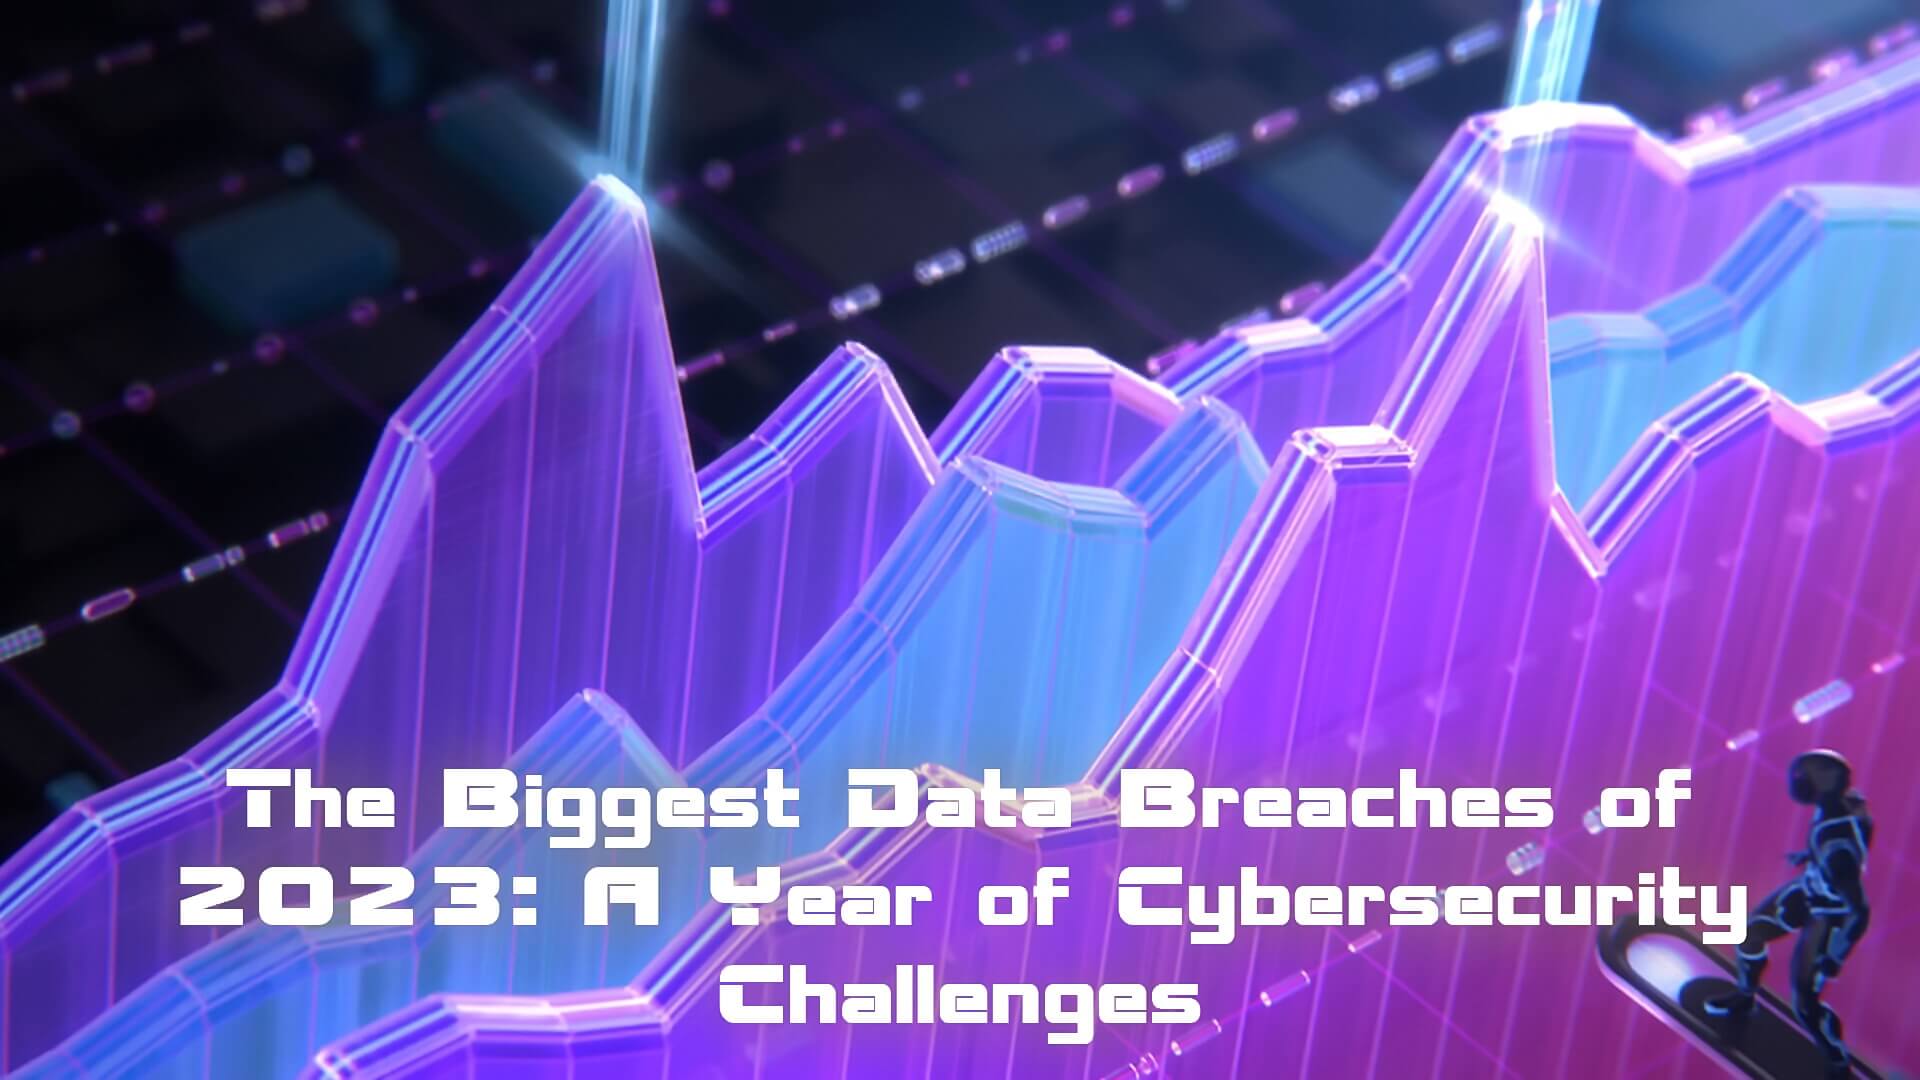 The Biggest Data Breaches of 2023: A Year of Cybersecurity Challenges